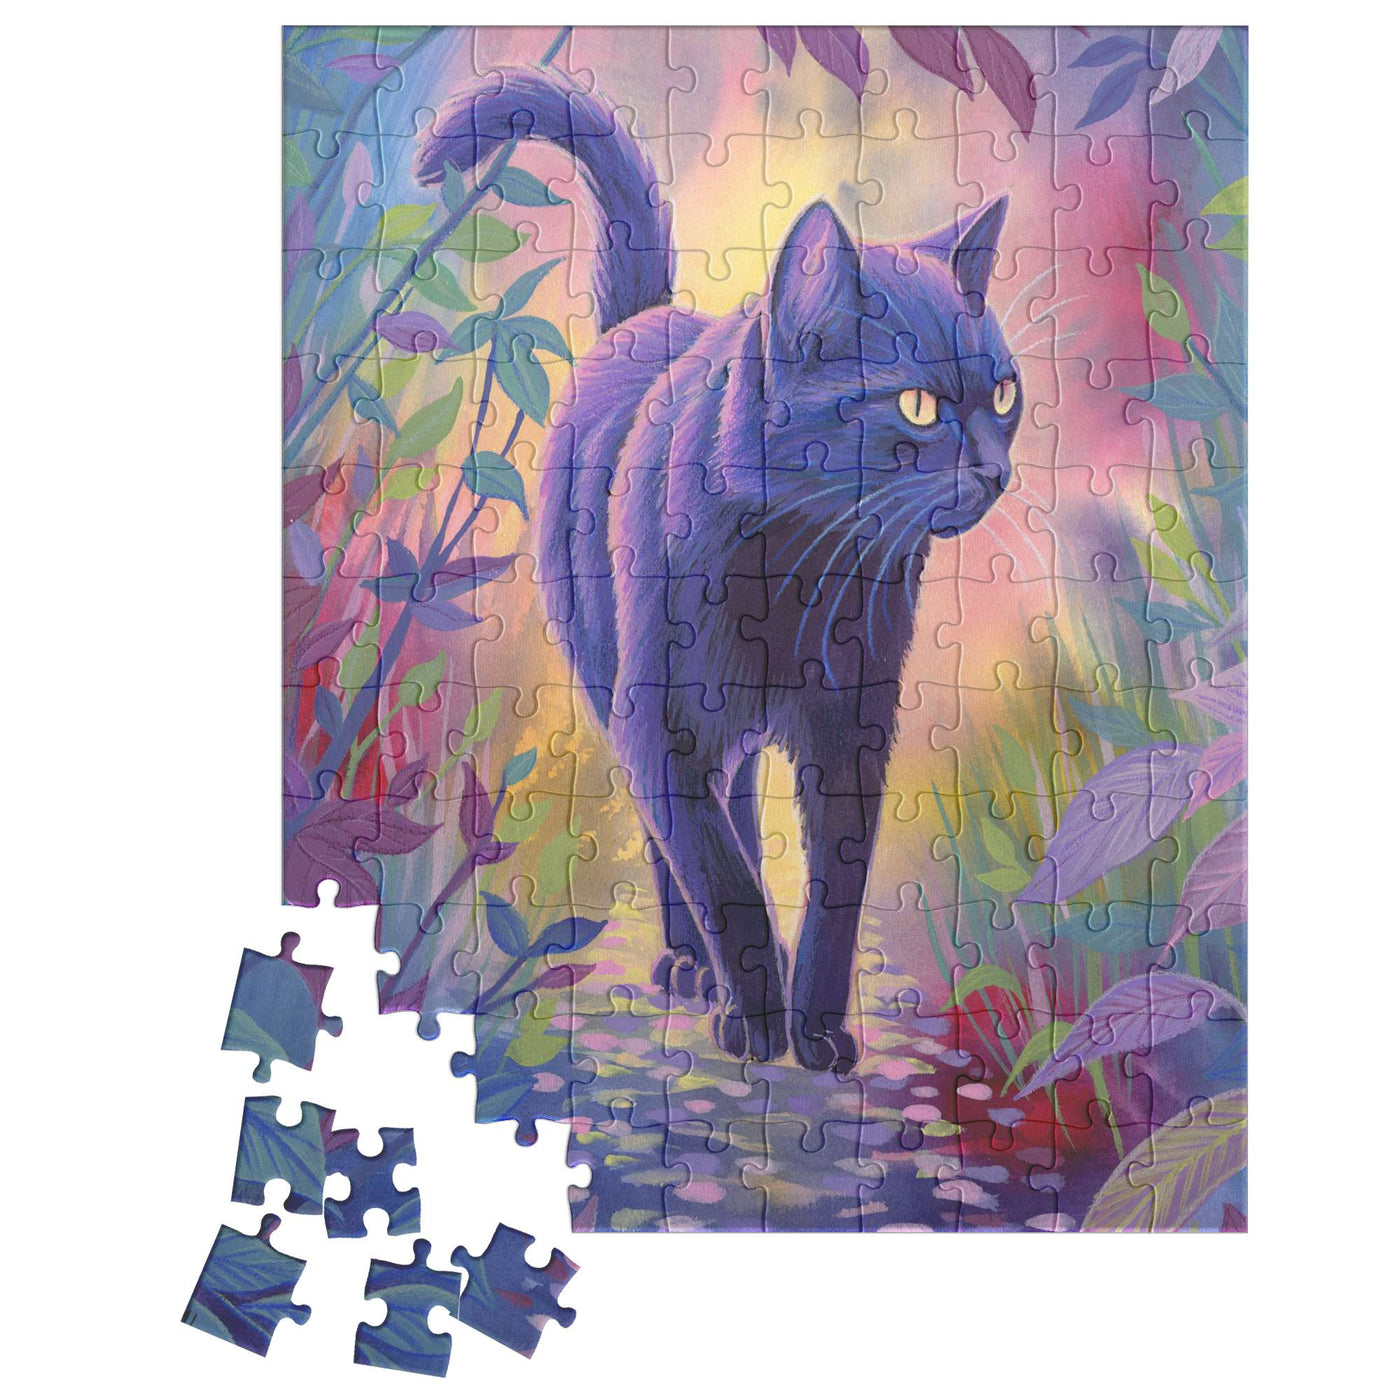 Cat Puzzle featuring an illustration of a black cat walking along a stone path surrounded by foliage, with puzzle pieces.